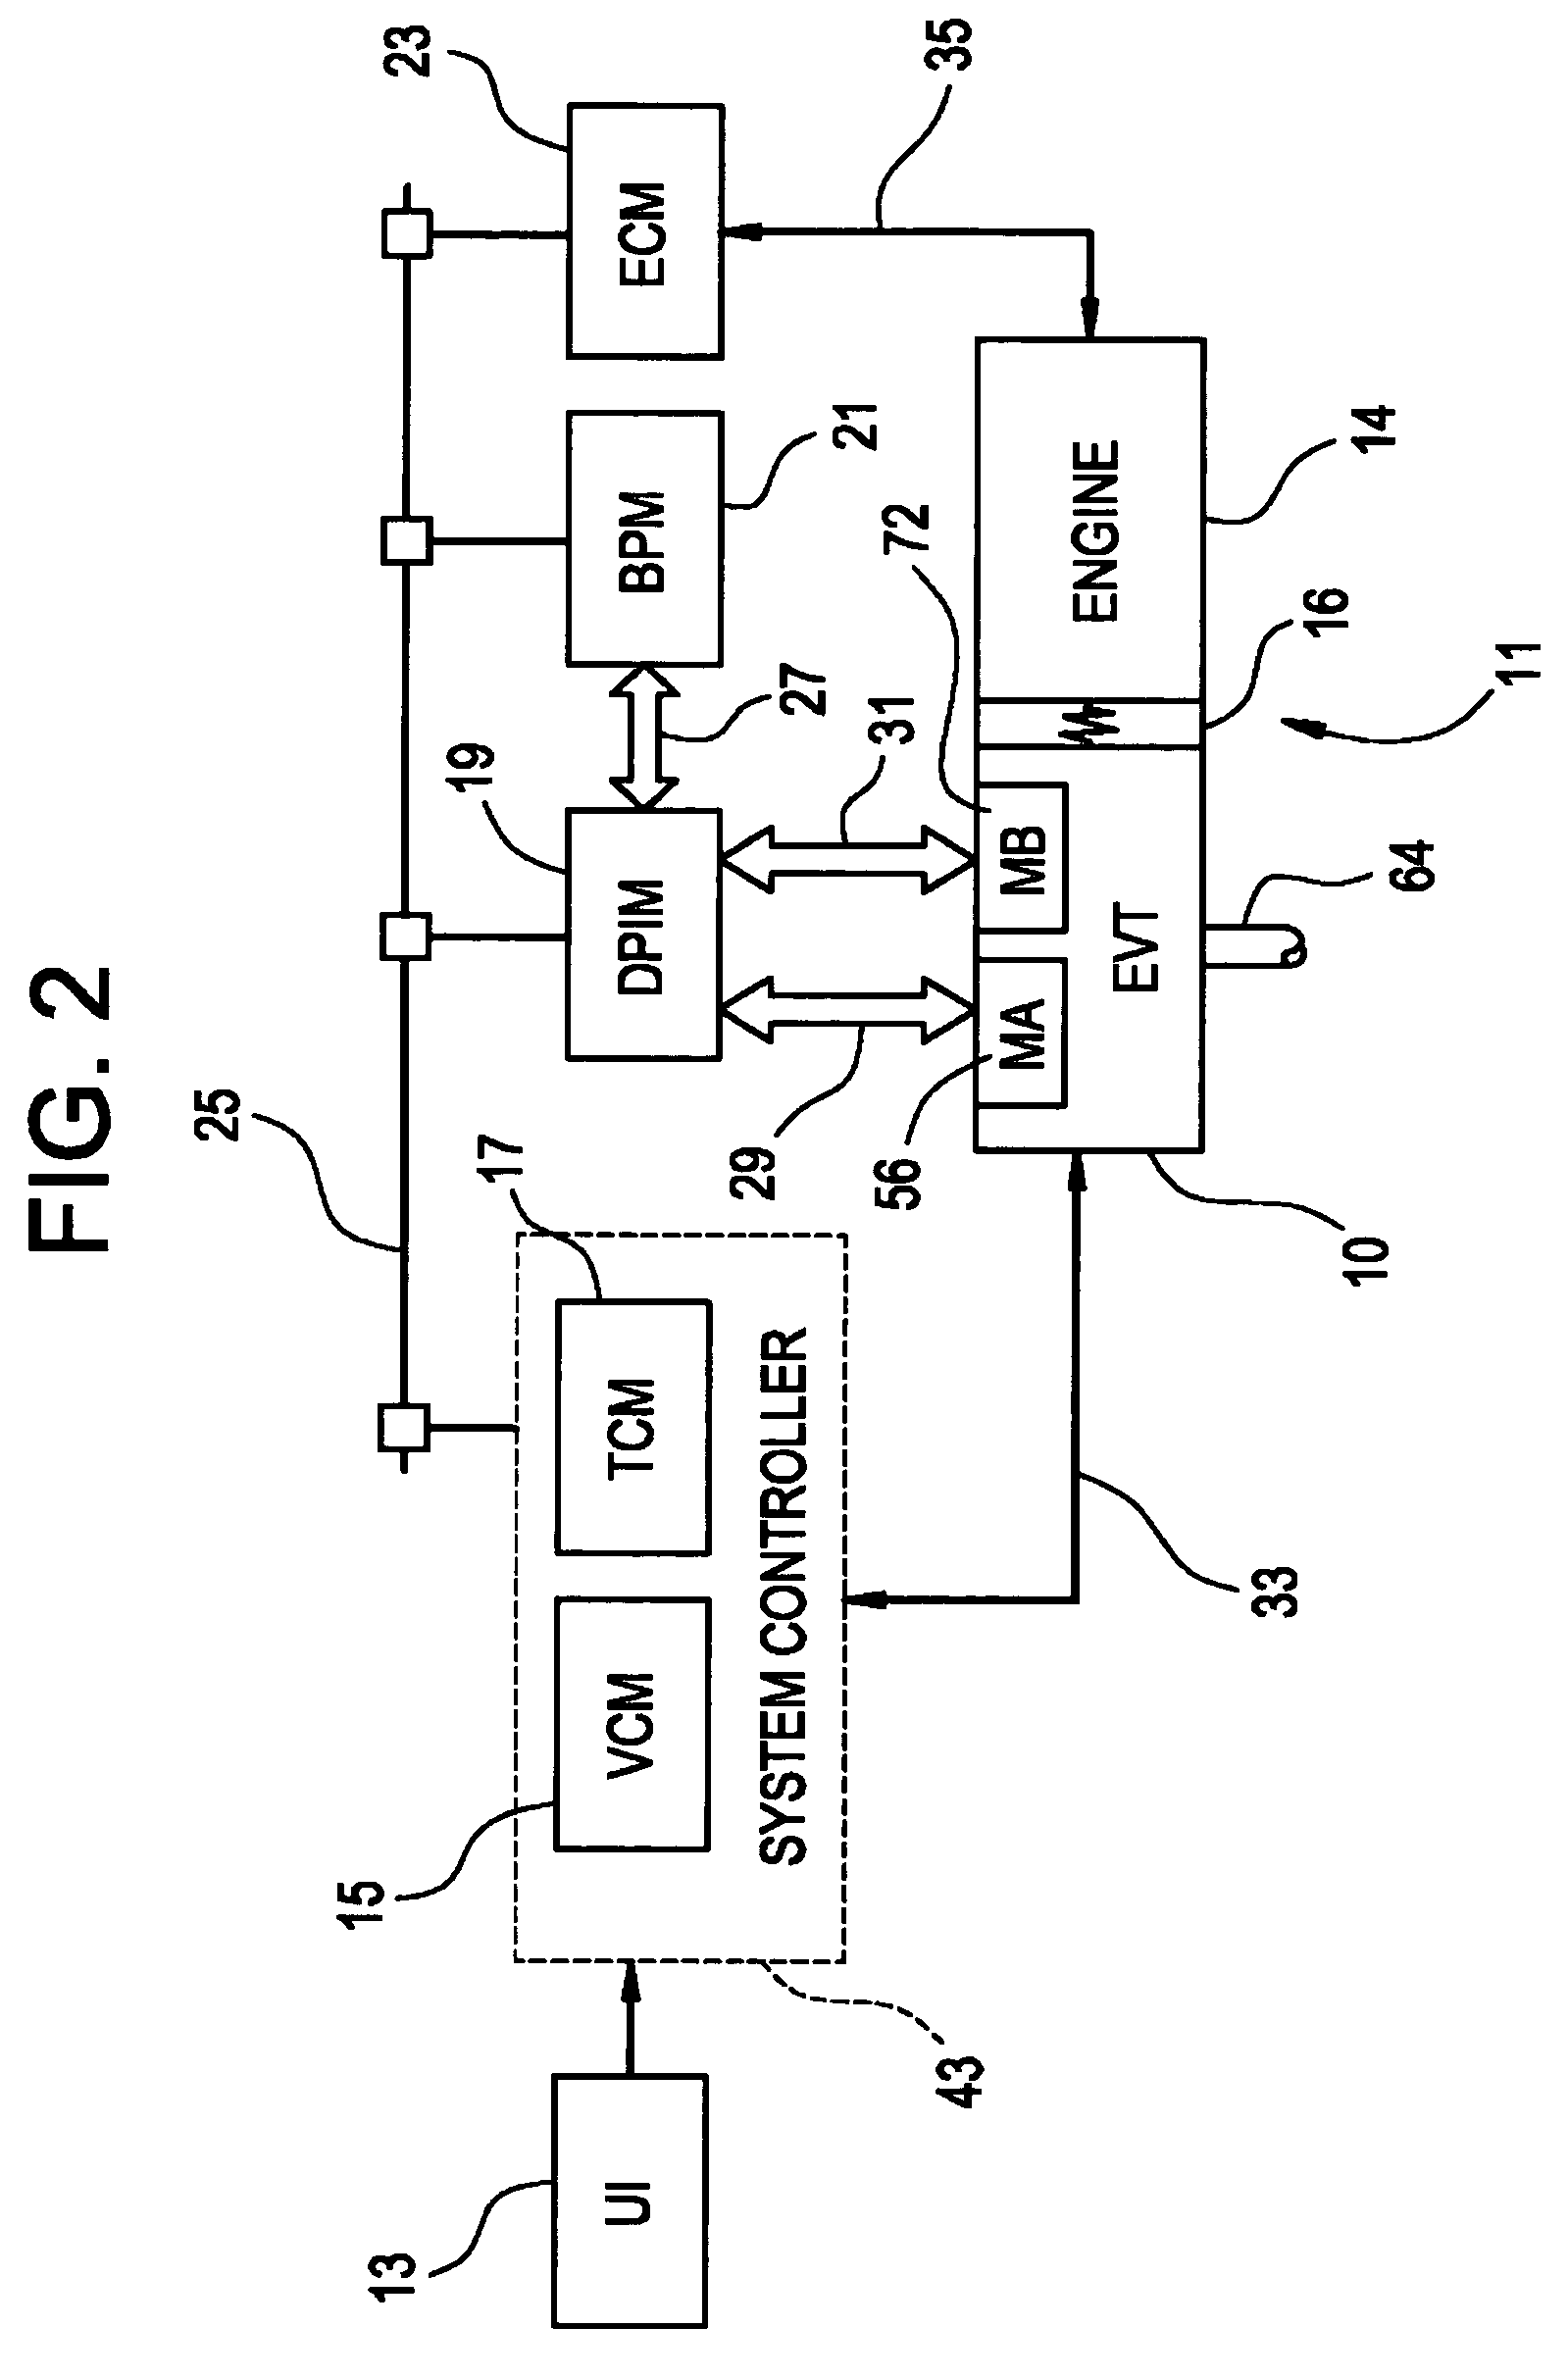 Optimal selection of input torque with stability of power flow for a hybrid electric vehicle